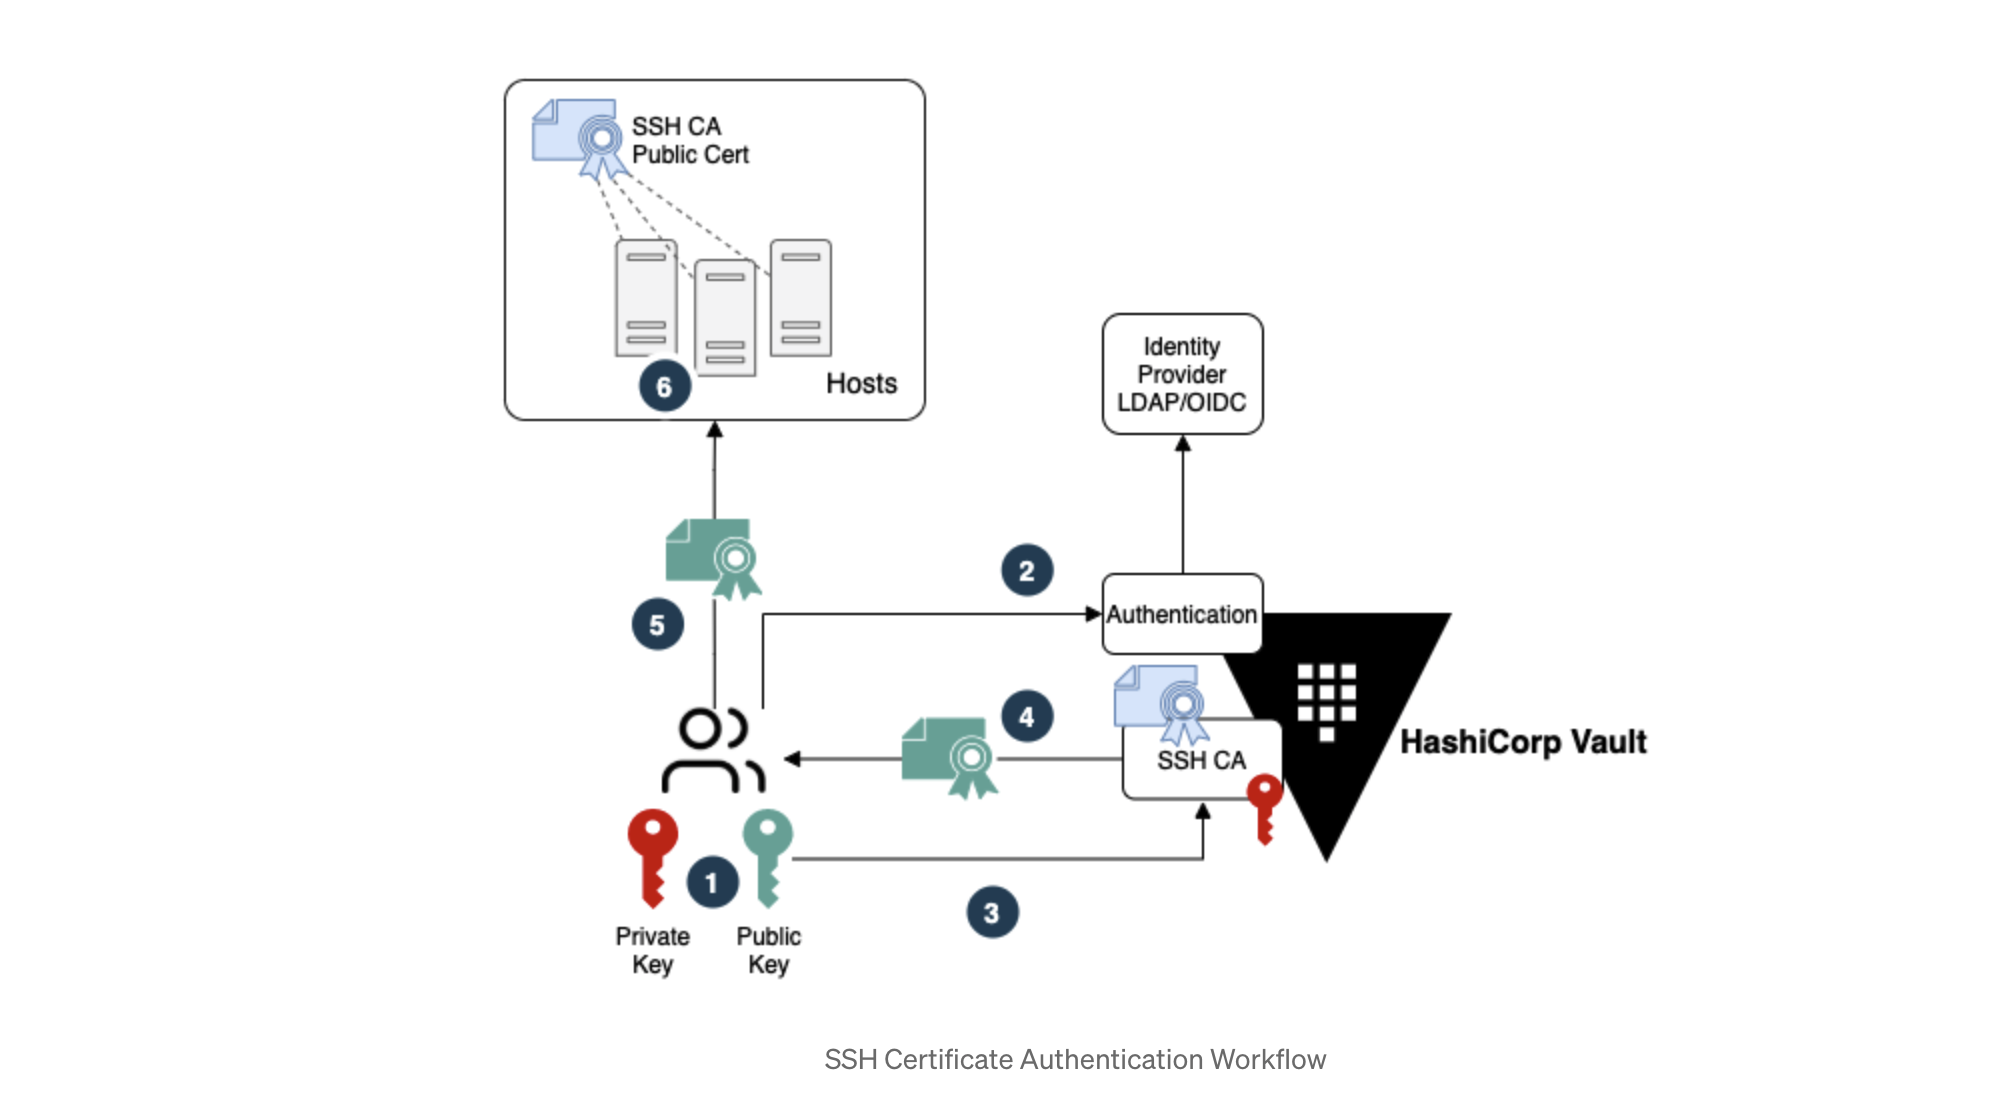 SSH Certificate Authority workflow